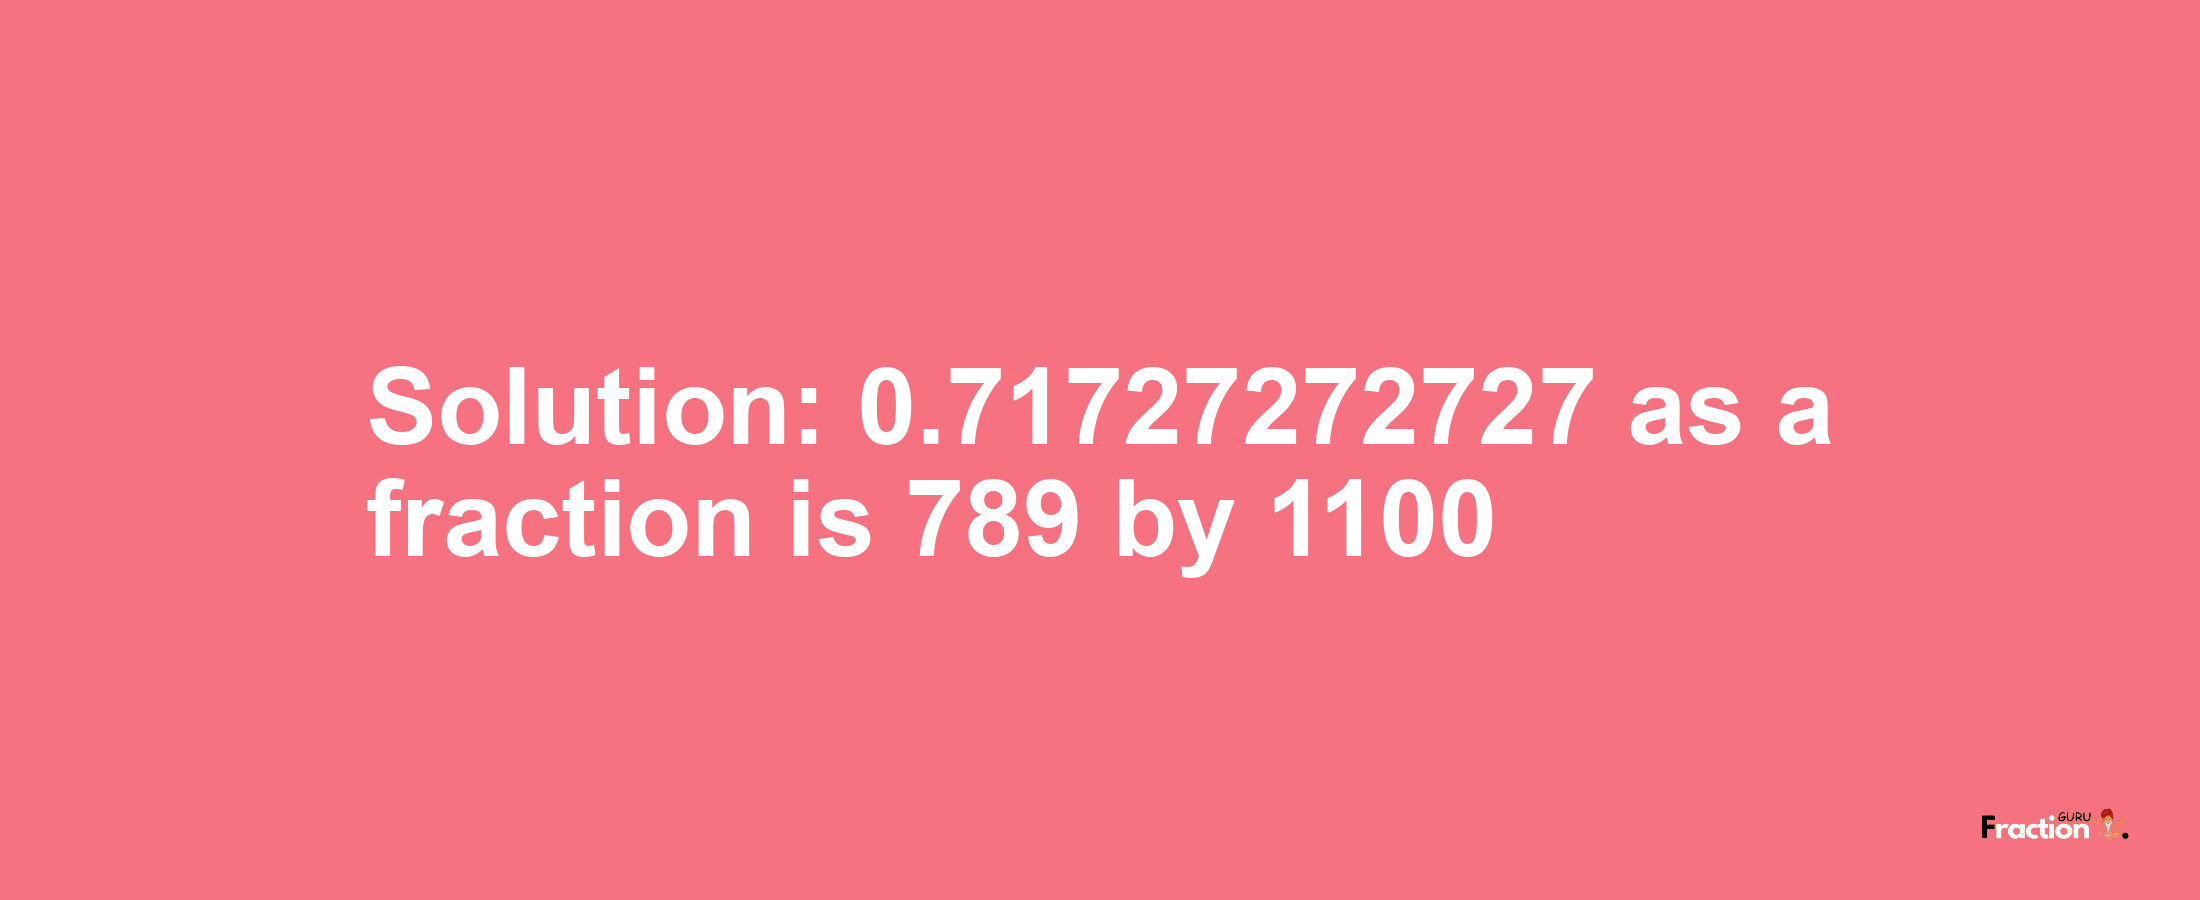 Solution:0.71727272727 as a fraction is 789/1100